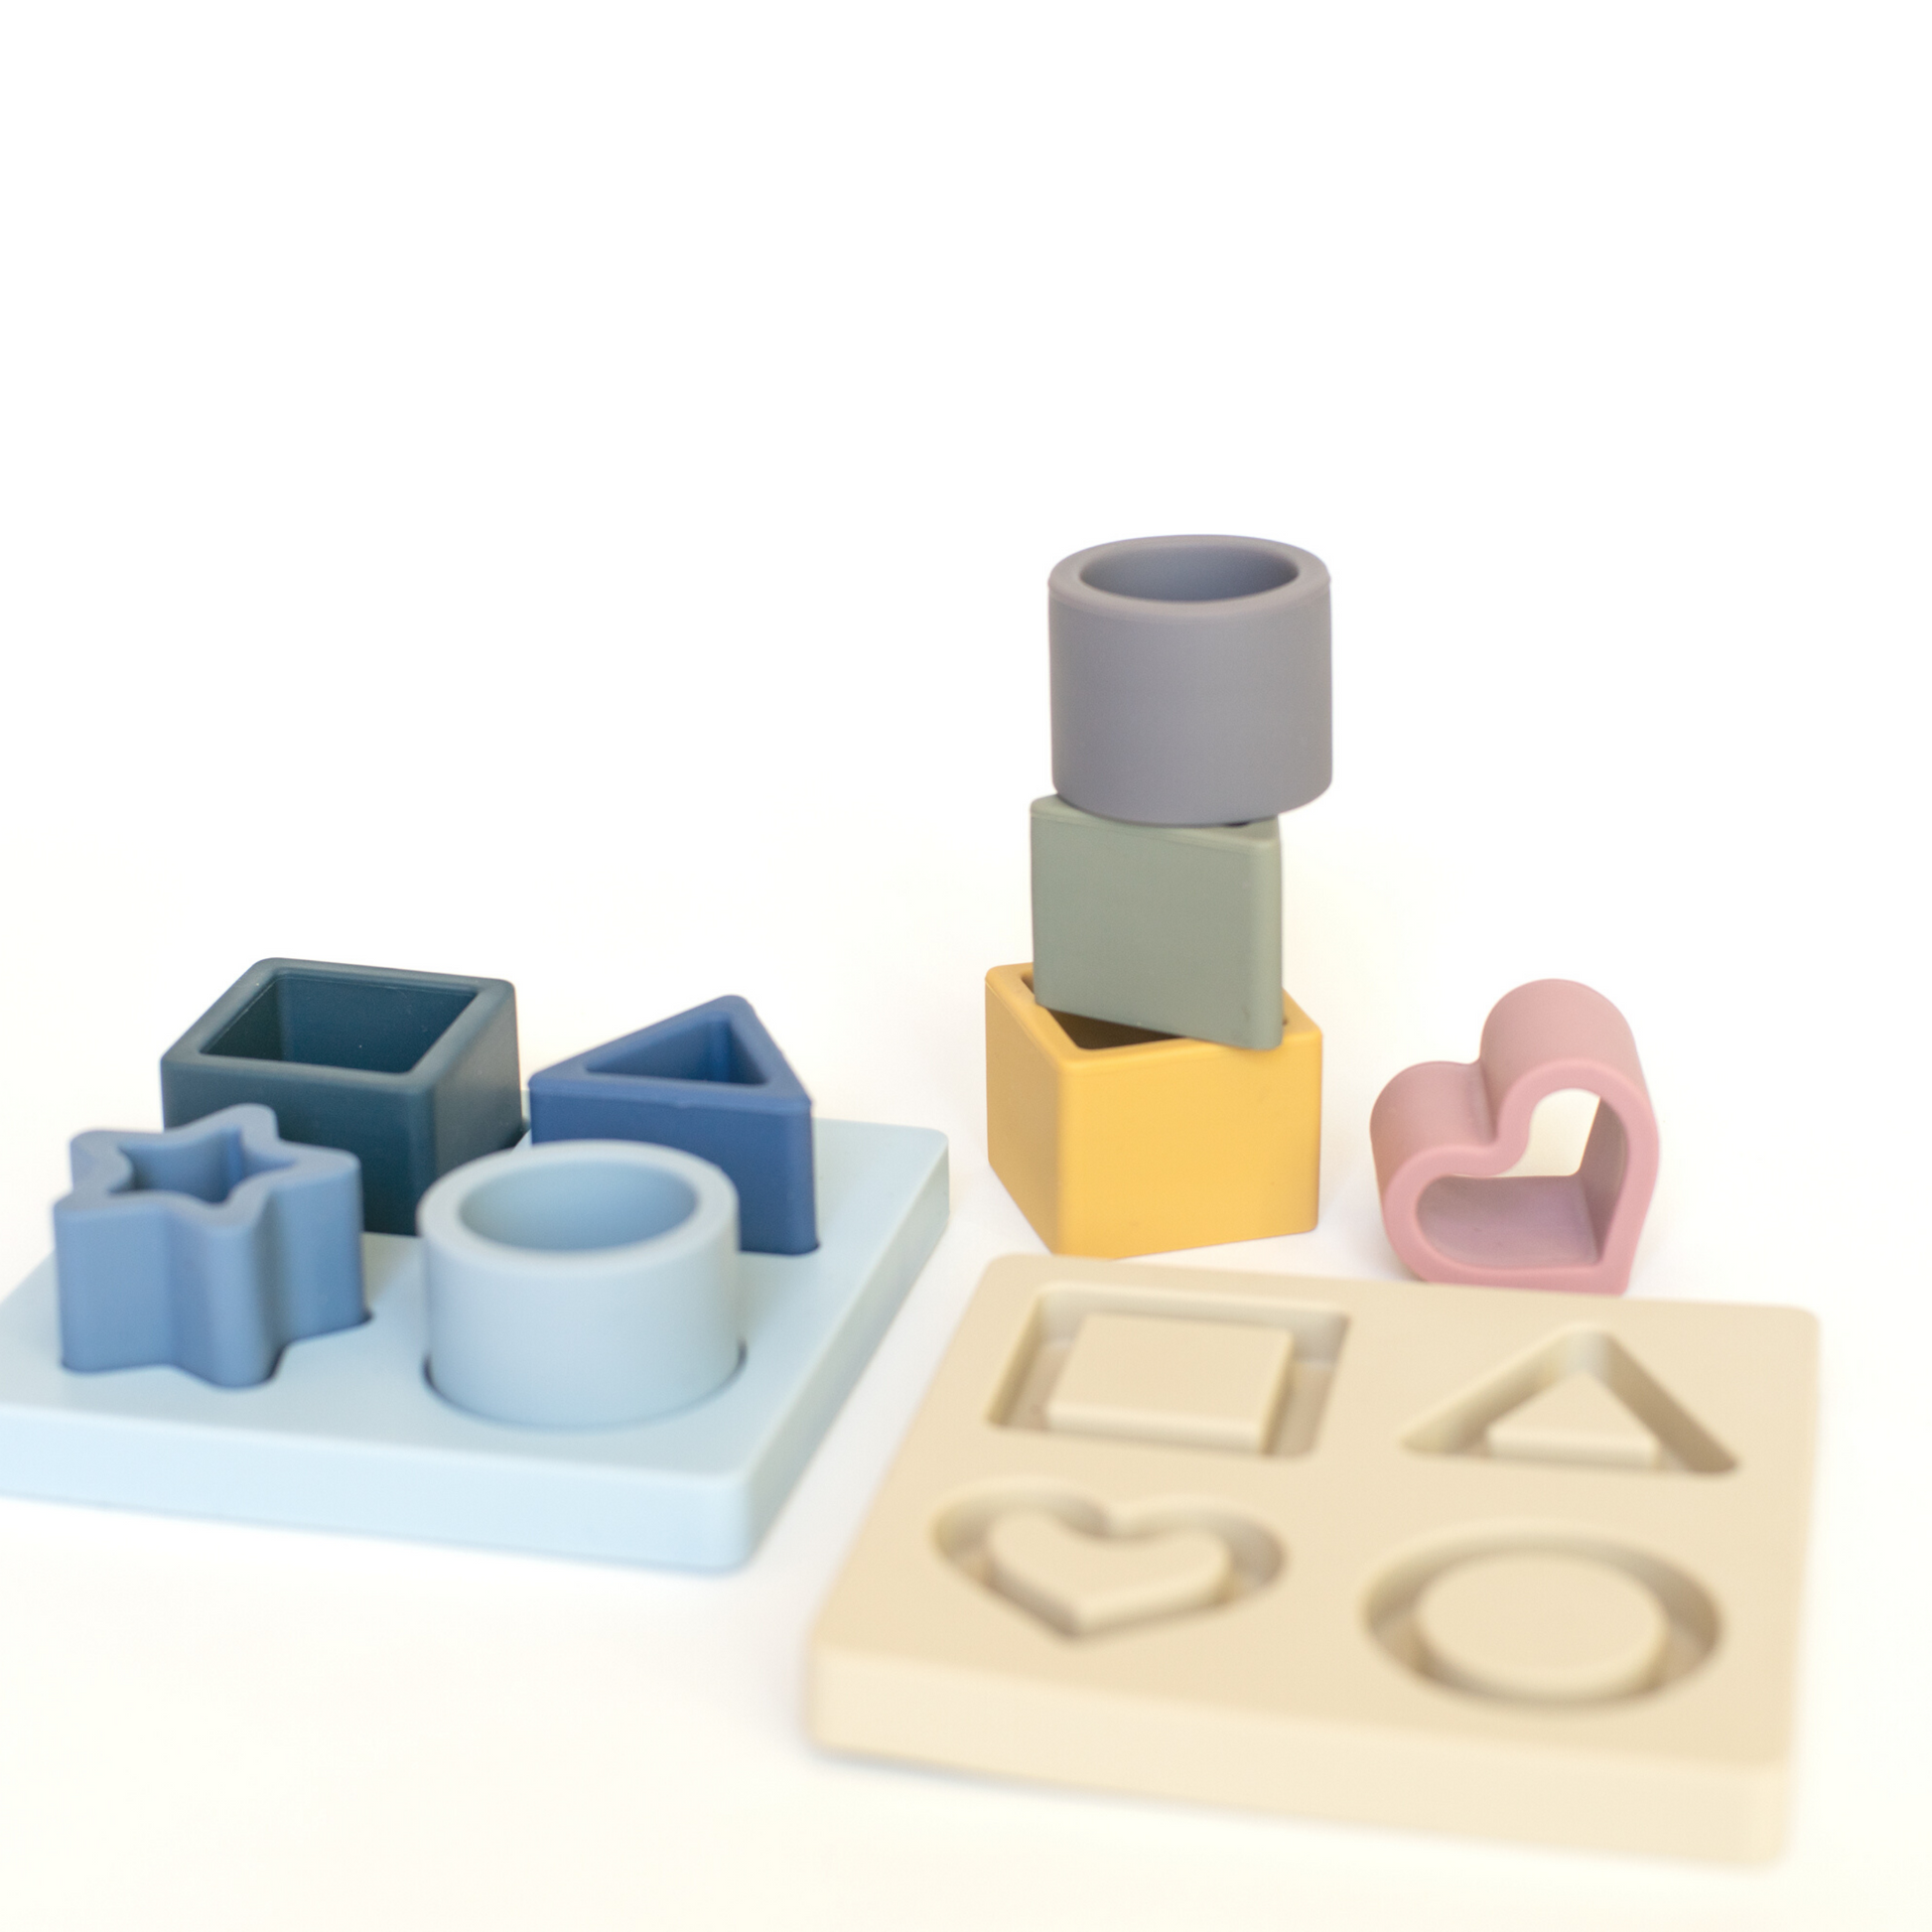 Silicone puzzle. Shape sorter. Silicone base and puzzle pieces.